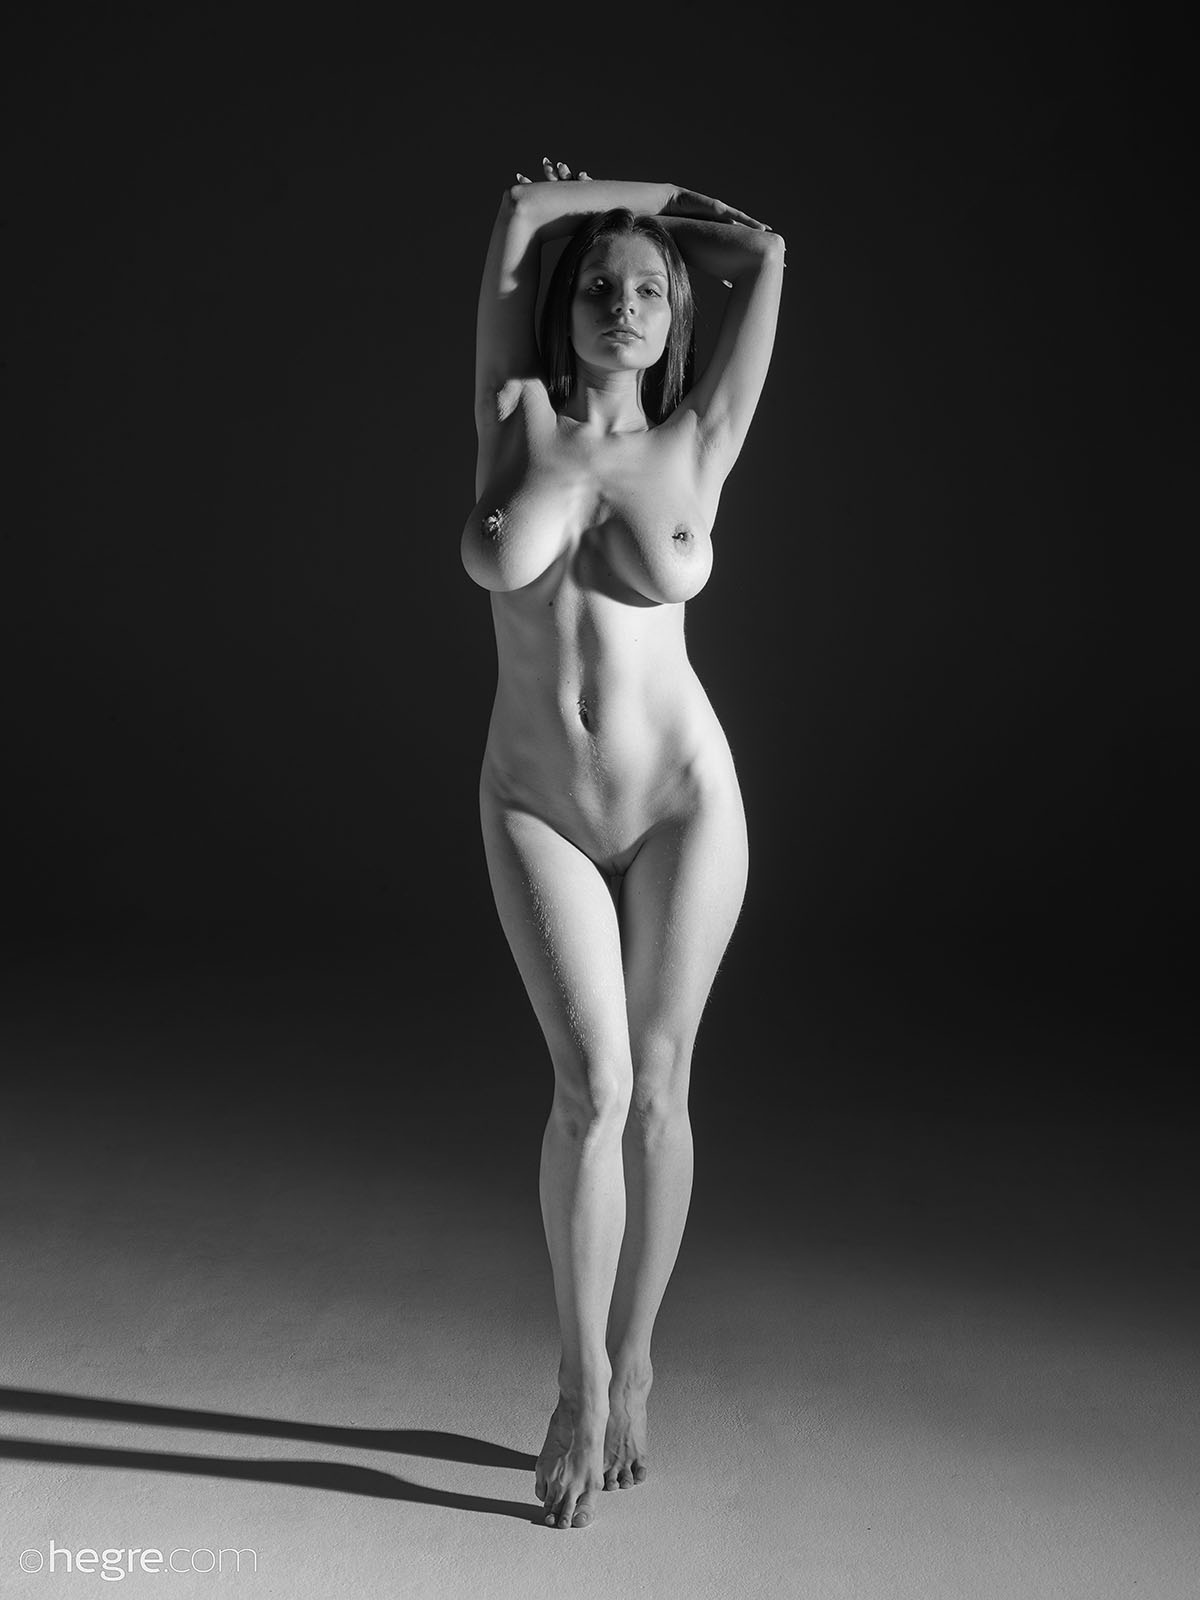 Mila A B&W nude photography by Hegre